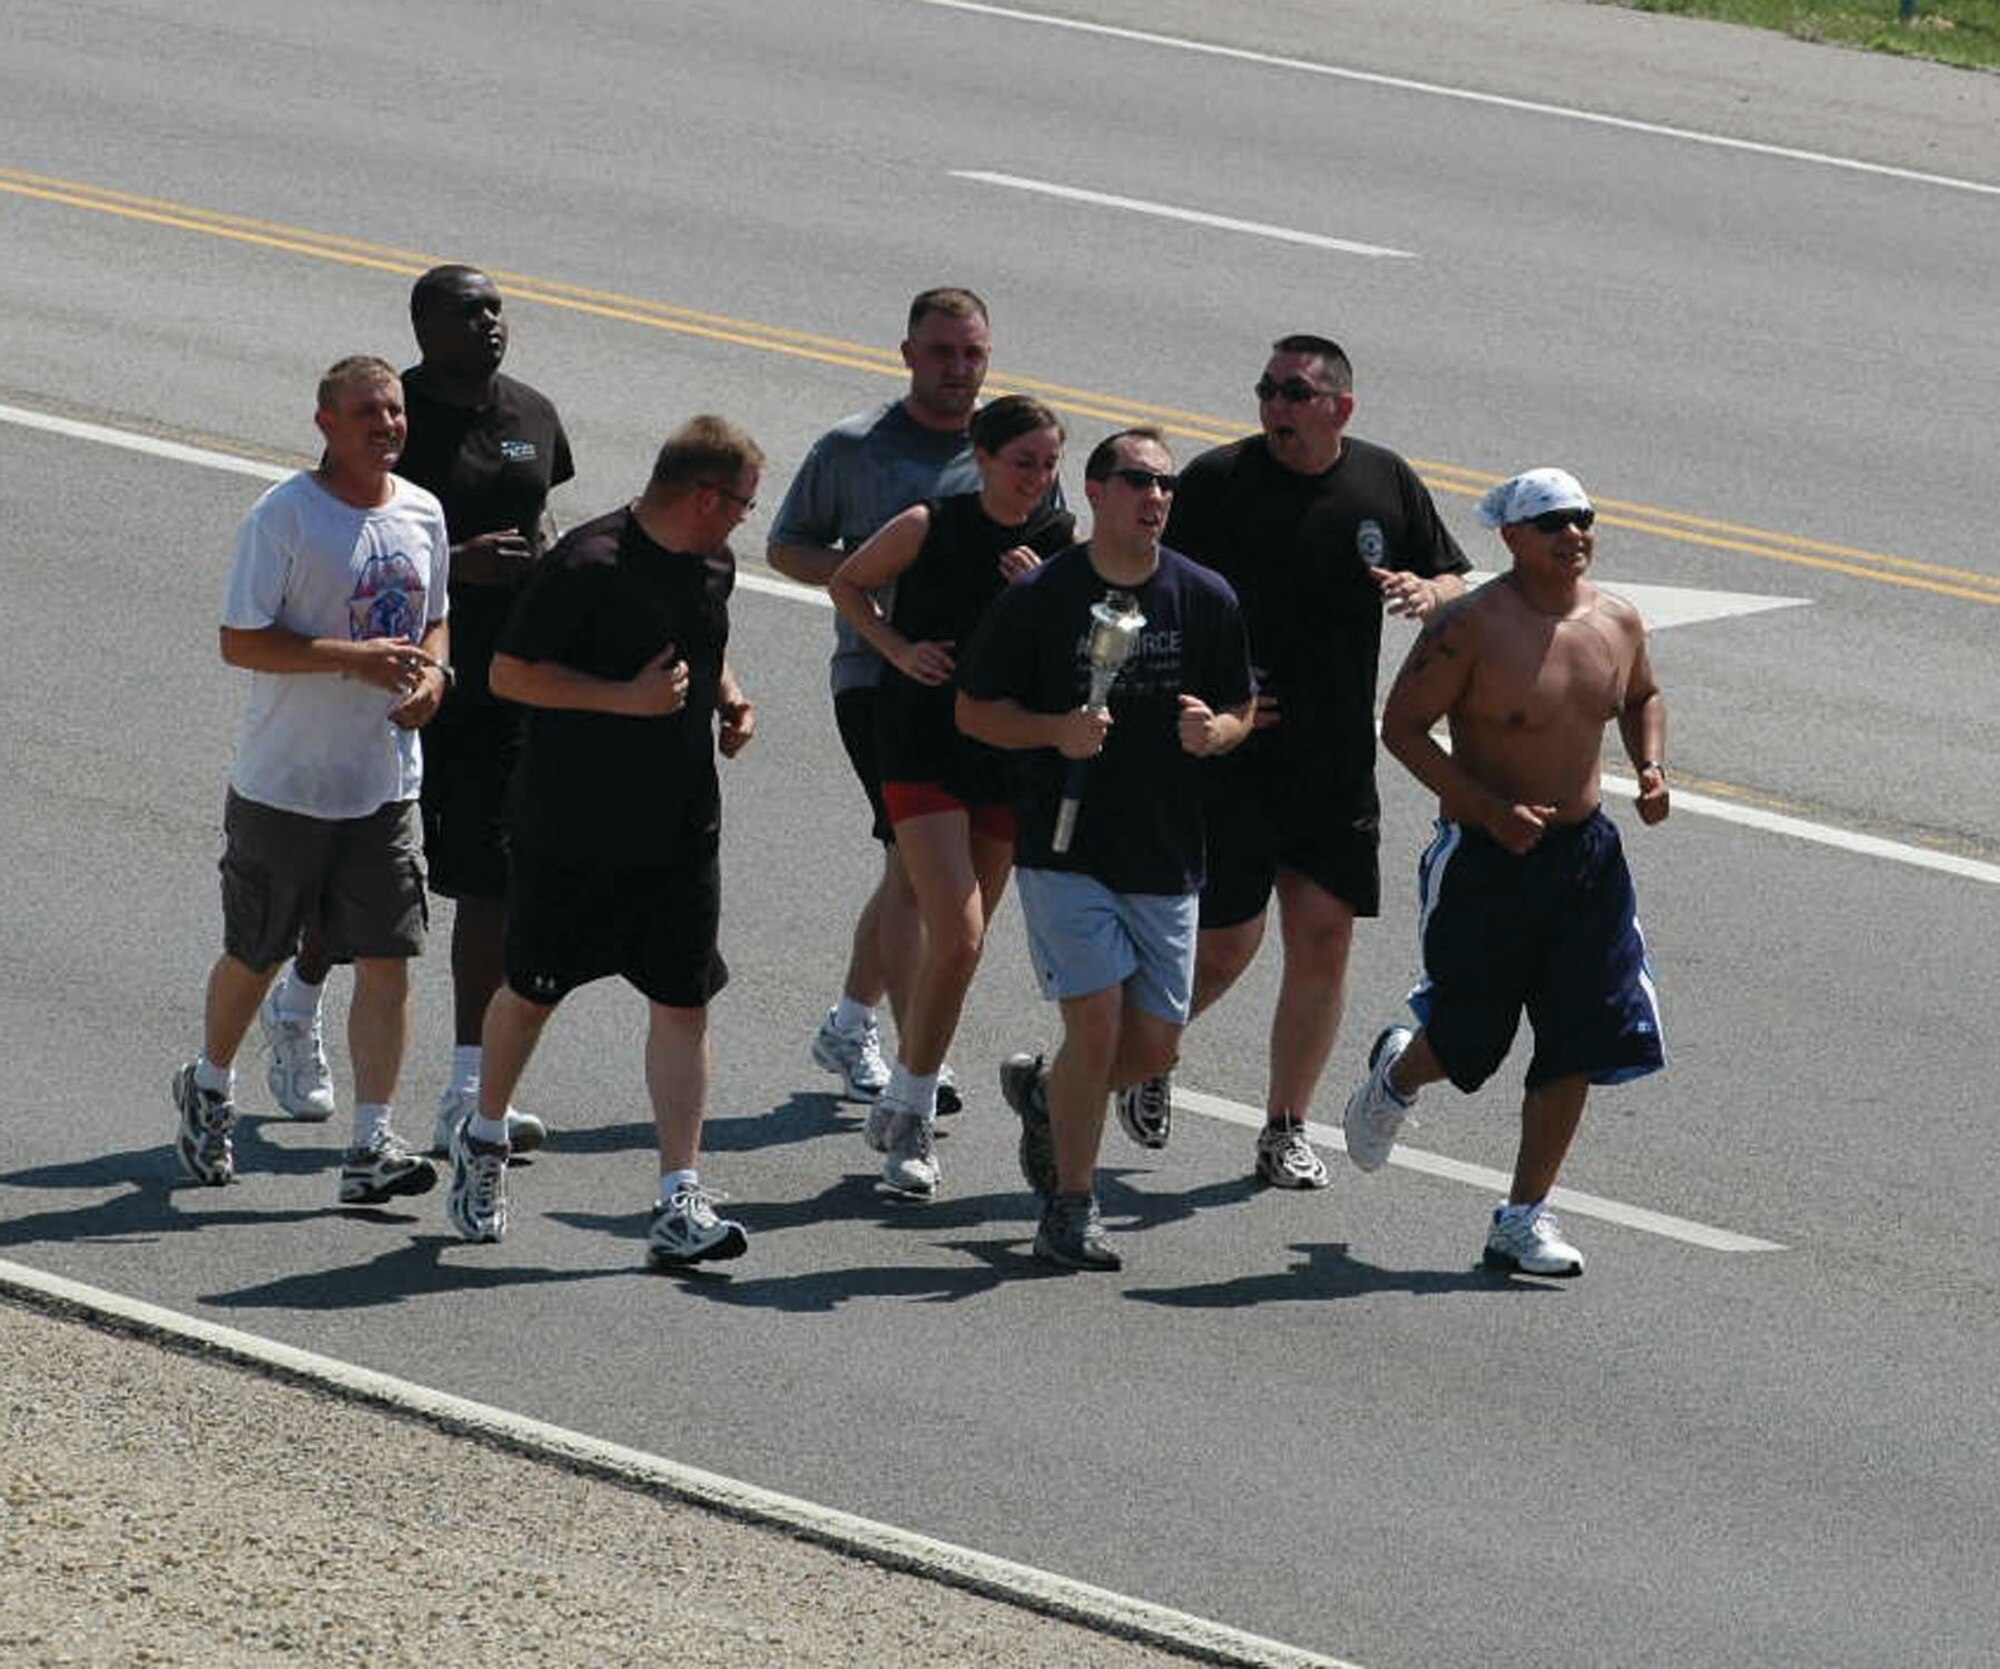 Members of the 931st SF, braving temperatures in the upper nineties, ran the Special Olympic torch from Derby, Kan. through the base.